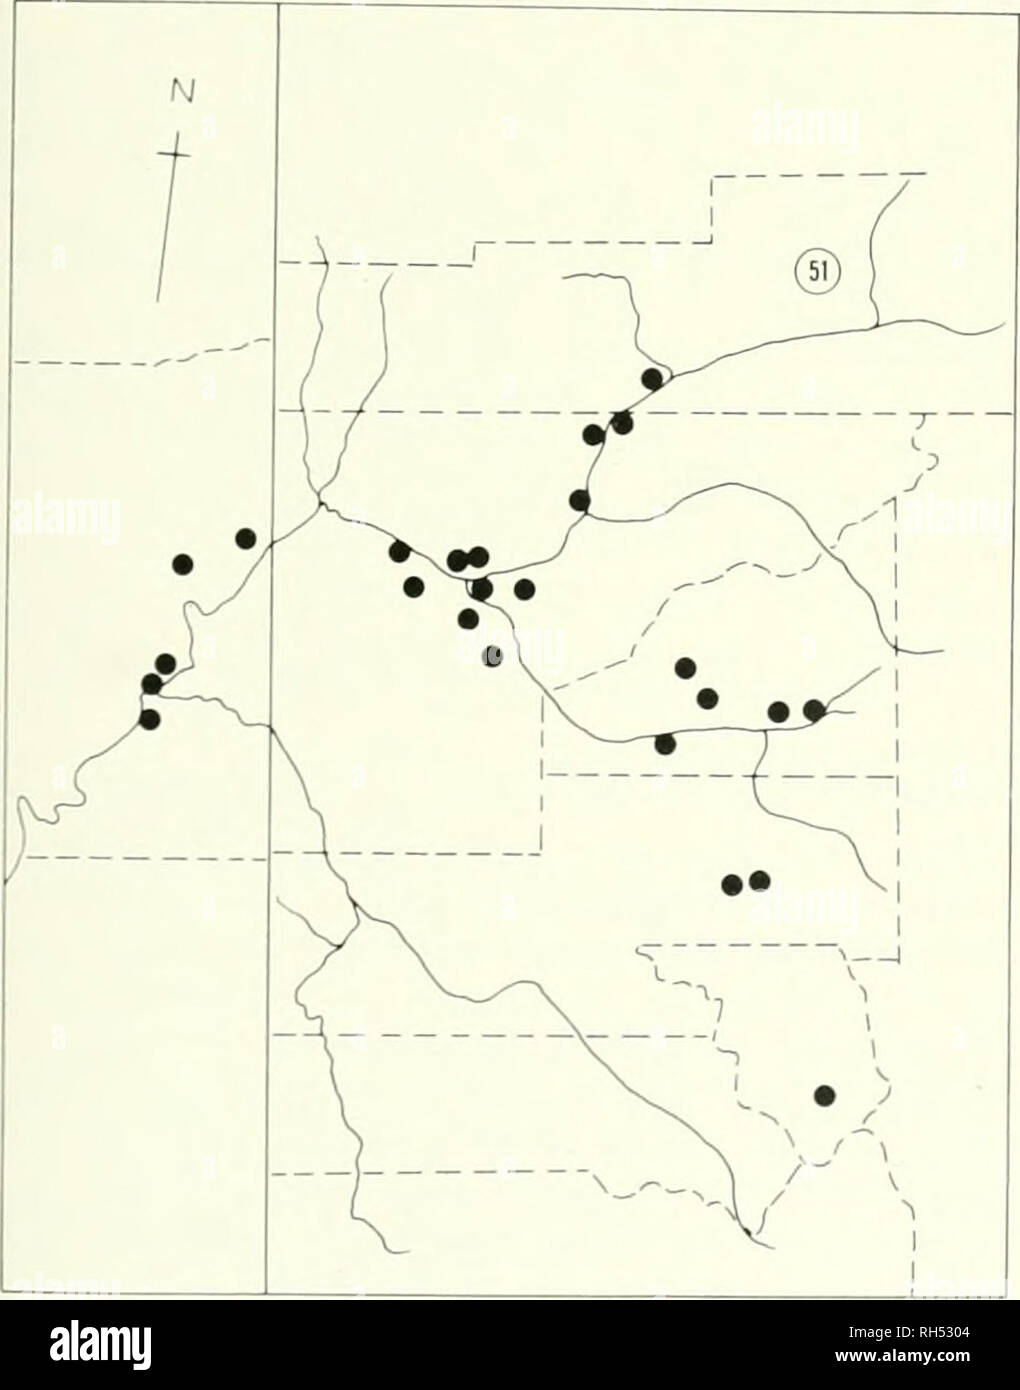 . Brigham Young University science bulletin. Biology -- Periodicals. Map No. Payson. 50. Eastern Utah. Range of C. wetherillii {Edslw.). .Map No. 51. Western Colorado and eastern Utah. Range of C. longiflora (A. Nels.) Payson. slendei, 1 -many, 0.8-1.2 dm long, sliigose and weakly spreading setose; leaves linear-spatulate, mostly basal, obtuse. 2-5 cm long, 0.3-0.6 cm wide, dorsal surface strigose and weakly spreading setose, conspicuously pustulate, ventral surface uniformly strigose and with- out pustules; inflorescence narrow, interrupted, 0.6-1.4 dm long, weakly setose, foliar bracts incon Stock Photo